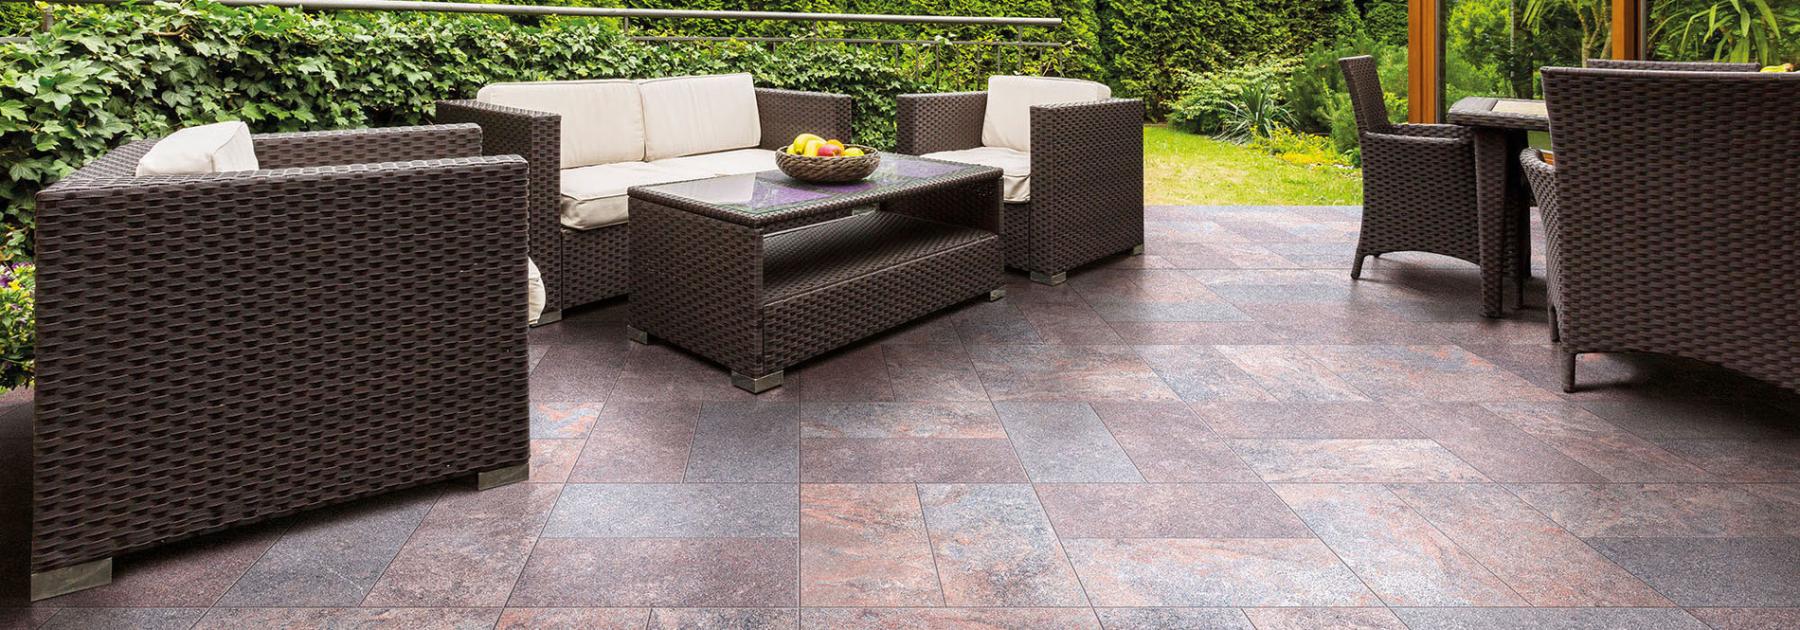 Porcelain Pavers 101: A Refresher Course in Helping Your Customers Elevate Their Outdoor Living Space